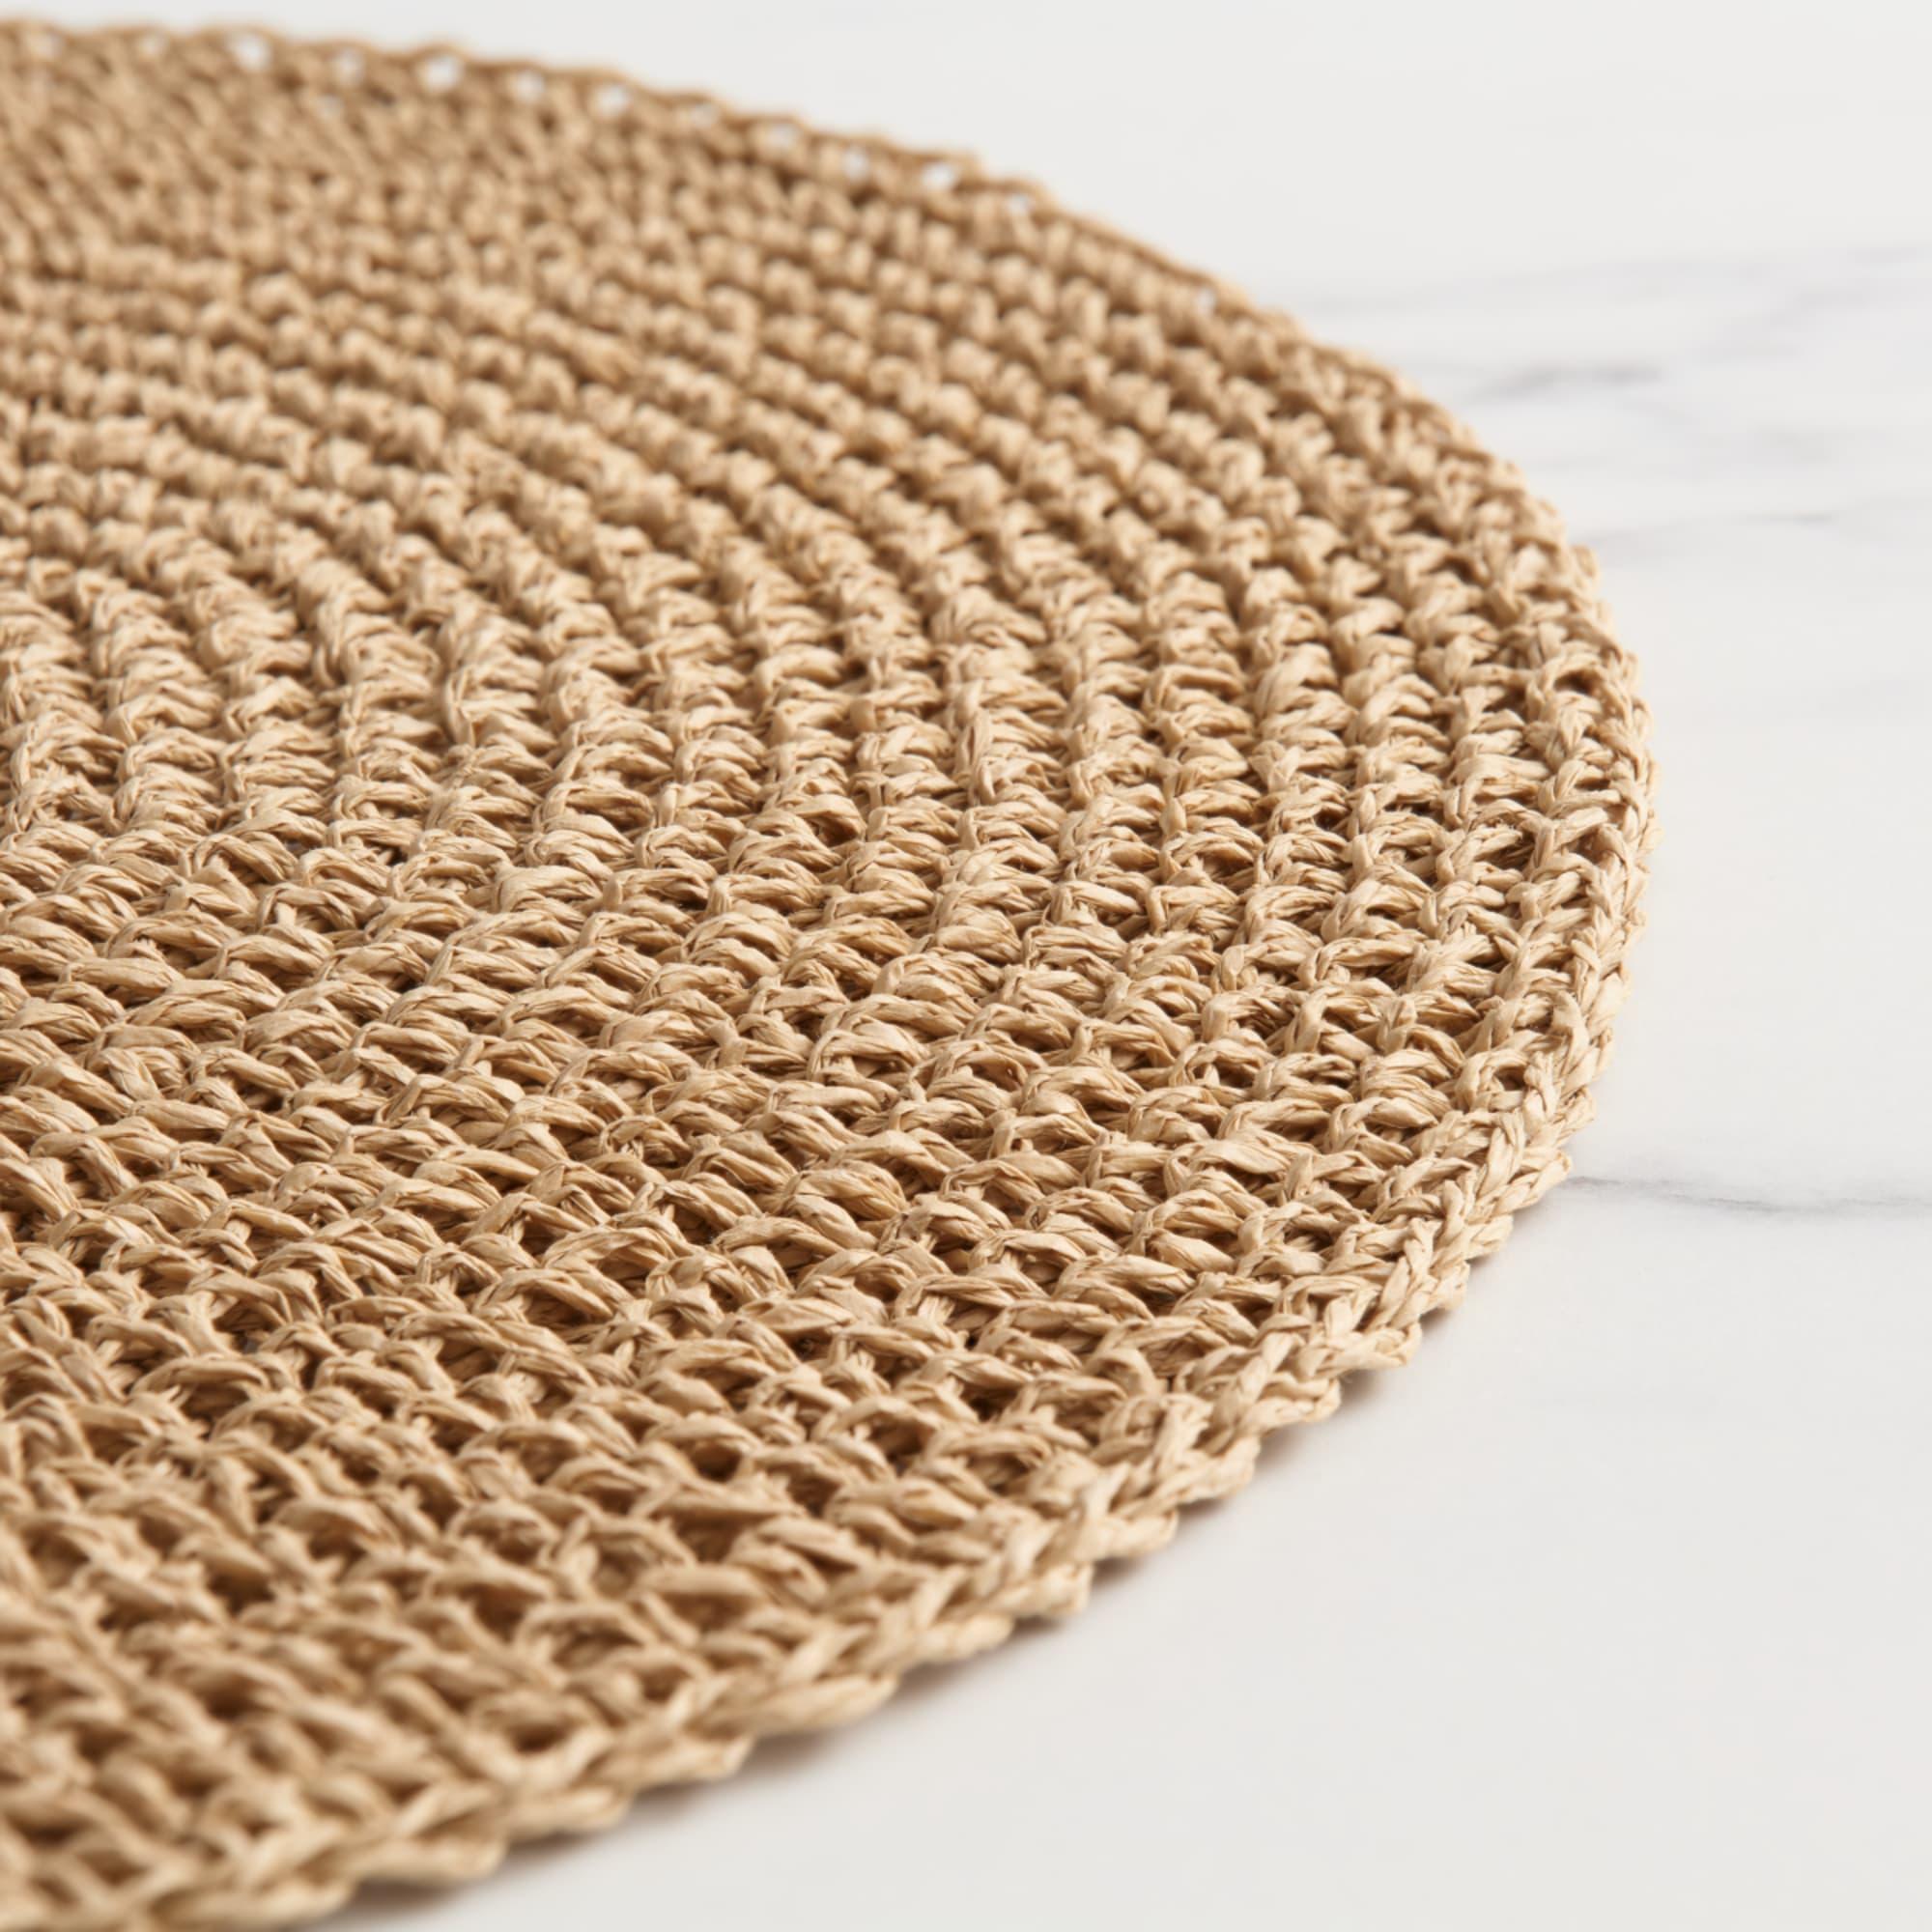 Salisbury & Co Woven Round Placemat 38cm Natural Image 3